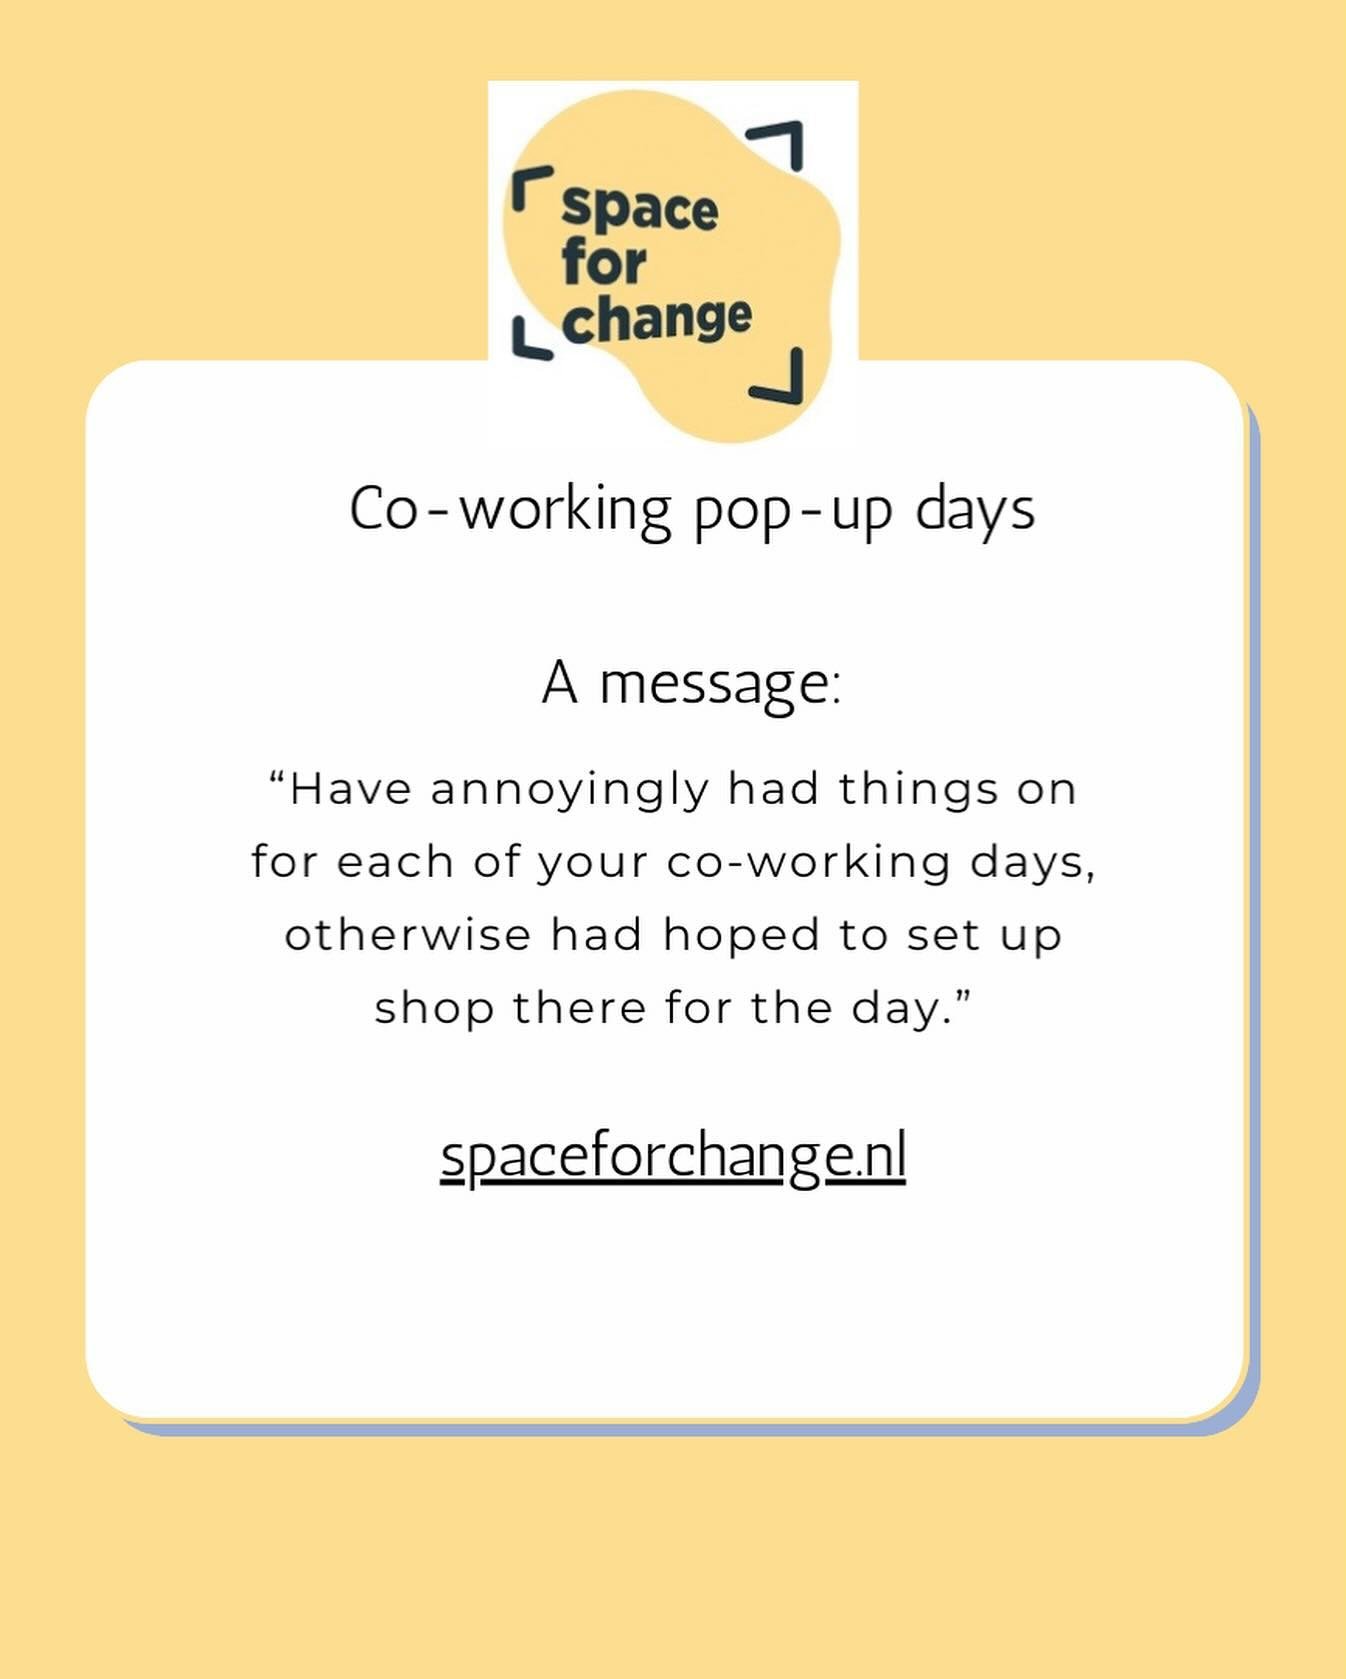 Does this sound familiar to you? 👆🏻Don&rsquo;t want to miss out on future pop-up co-working opportunities @spaceforchangeams? Send us a dm with your email address or follow along here to stay up to date on pop-up dates. If you can&rsquo;t make one 